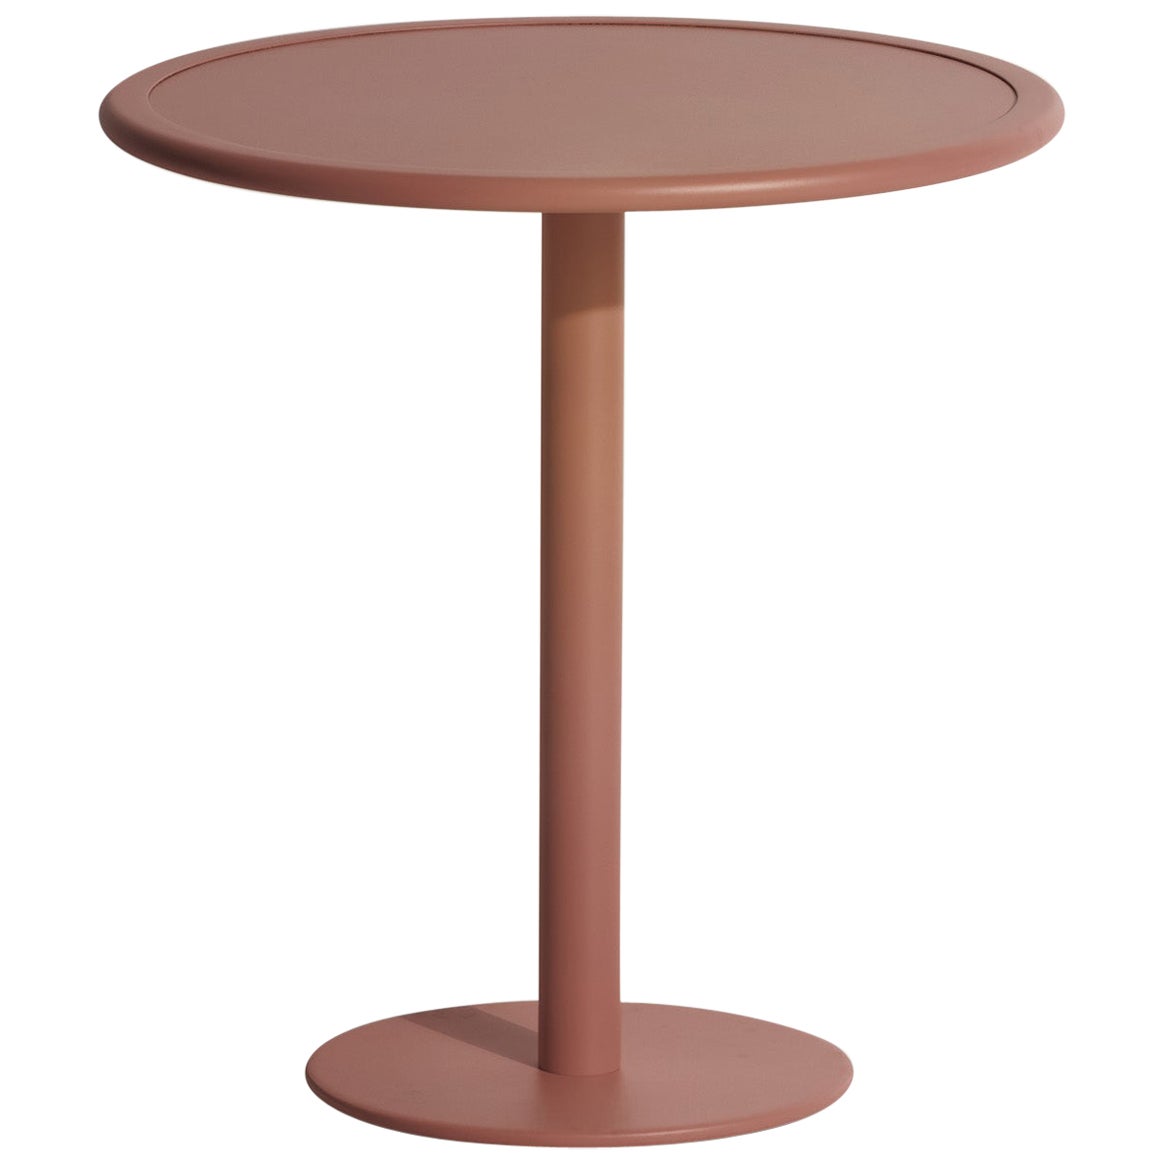 Petite Friture Week-End Bistro Round Dining Table in Terracotta Aluminium, 2017